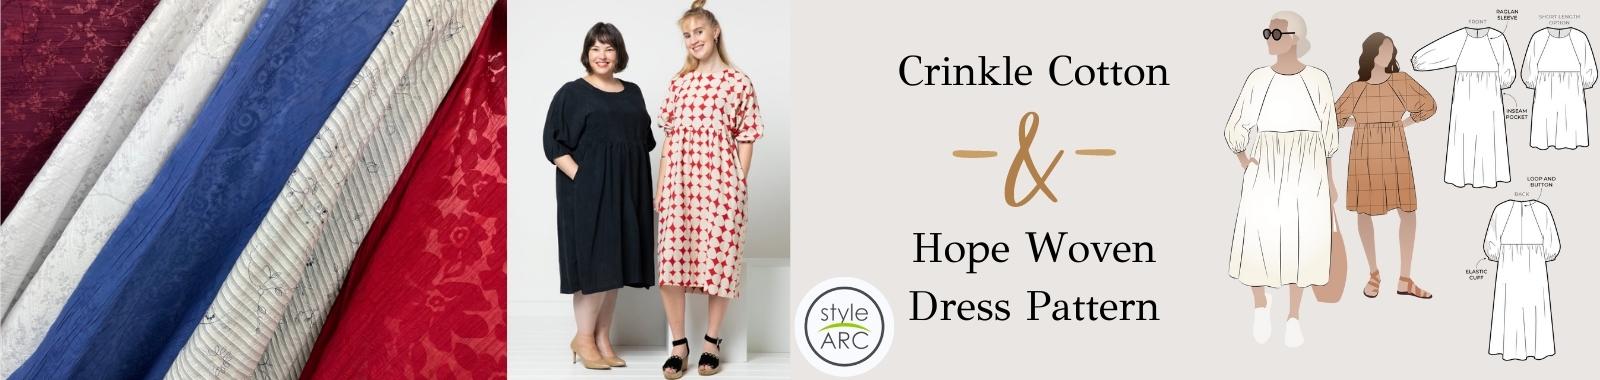 Crinkle_Cotton_And_Hope_Woven_Dress_Pattern